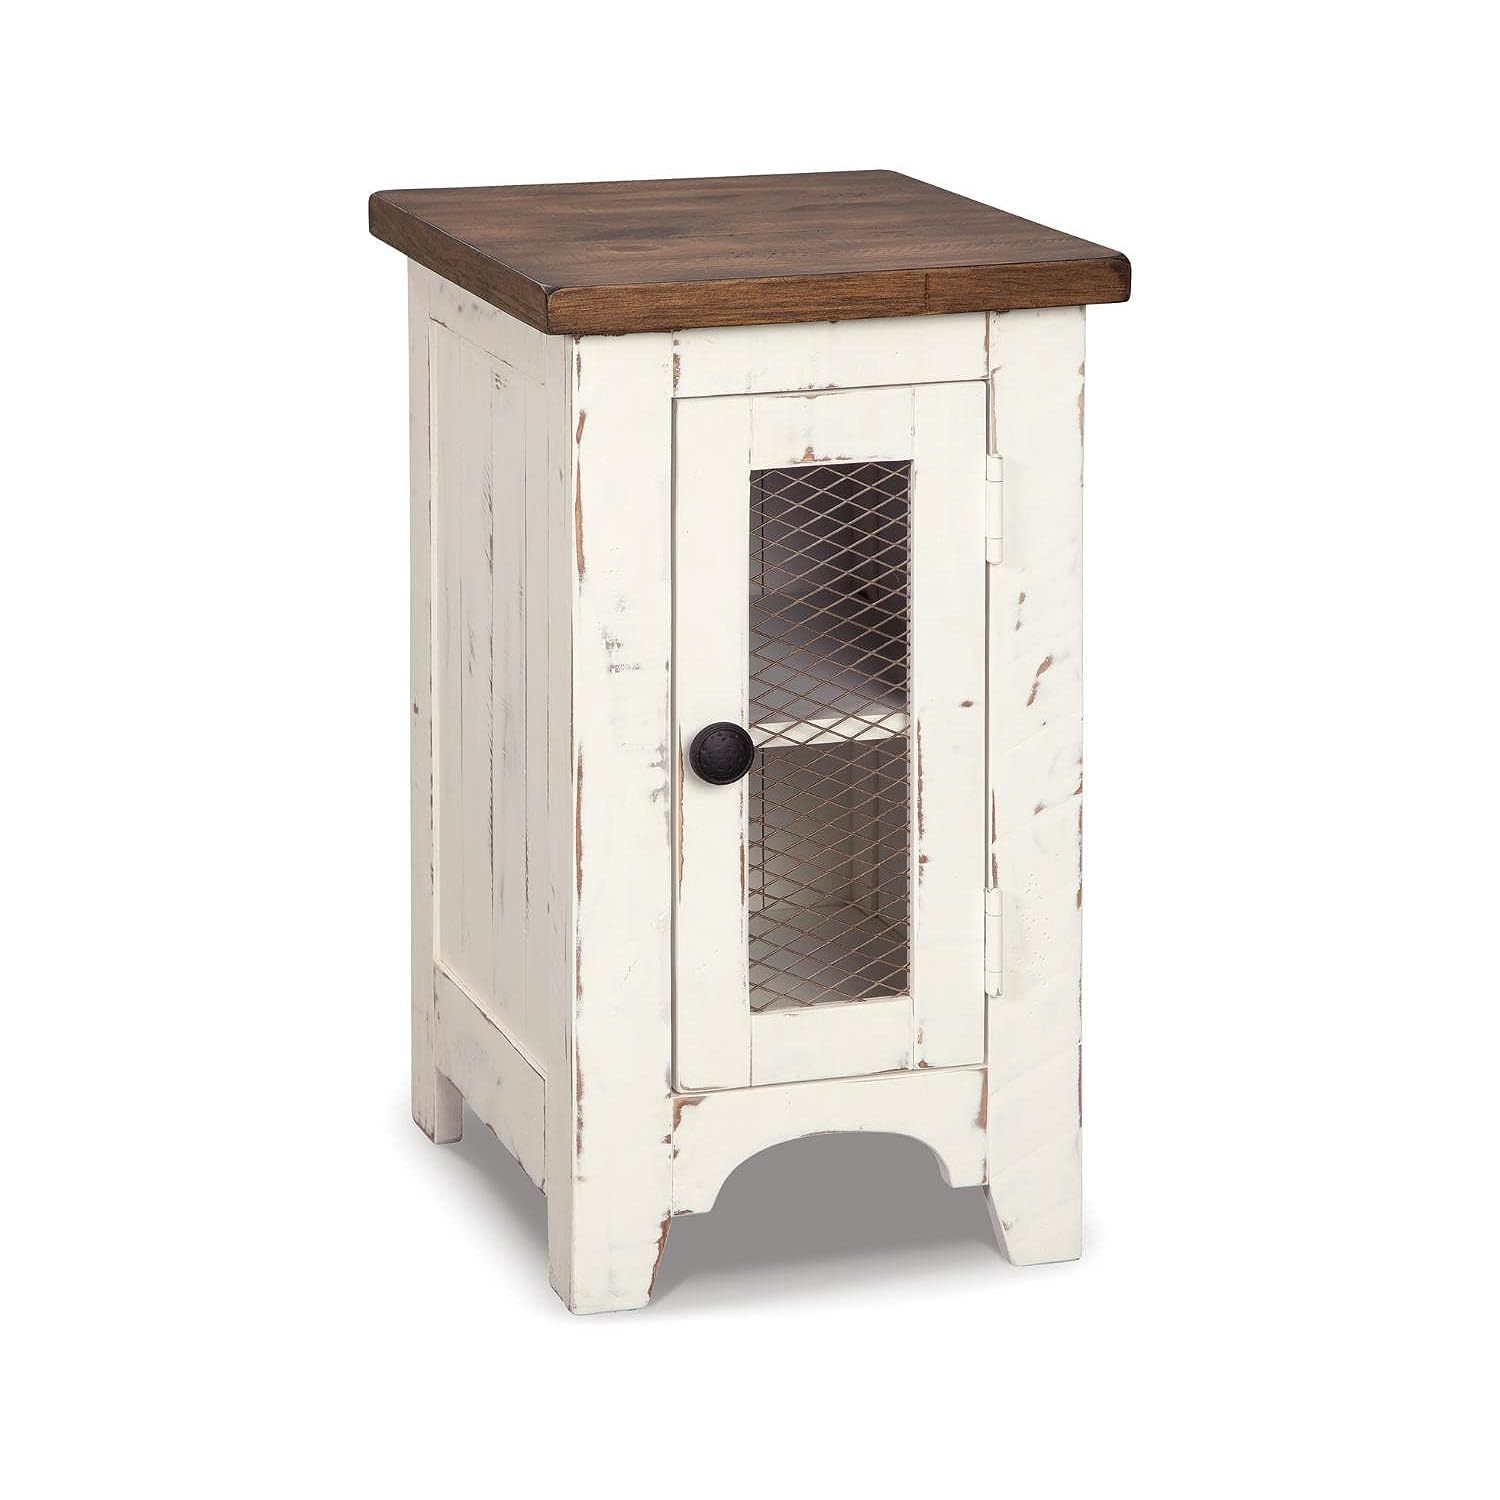 Signature Design by Ashley Wystfield Chairside End Table, White - $219.99